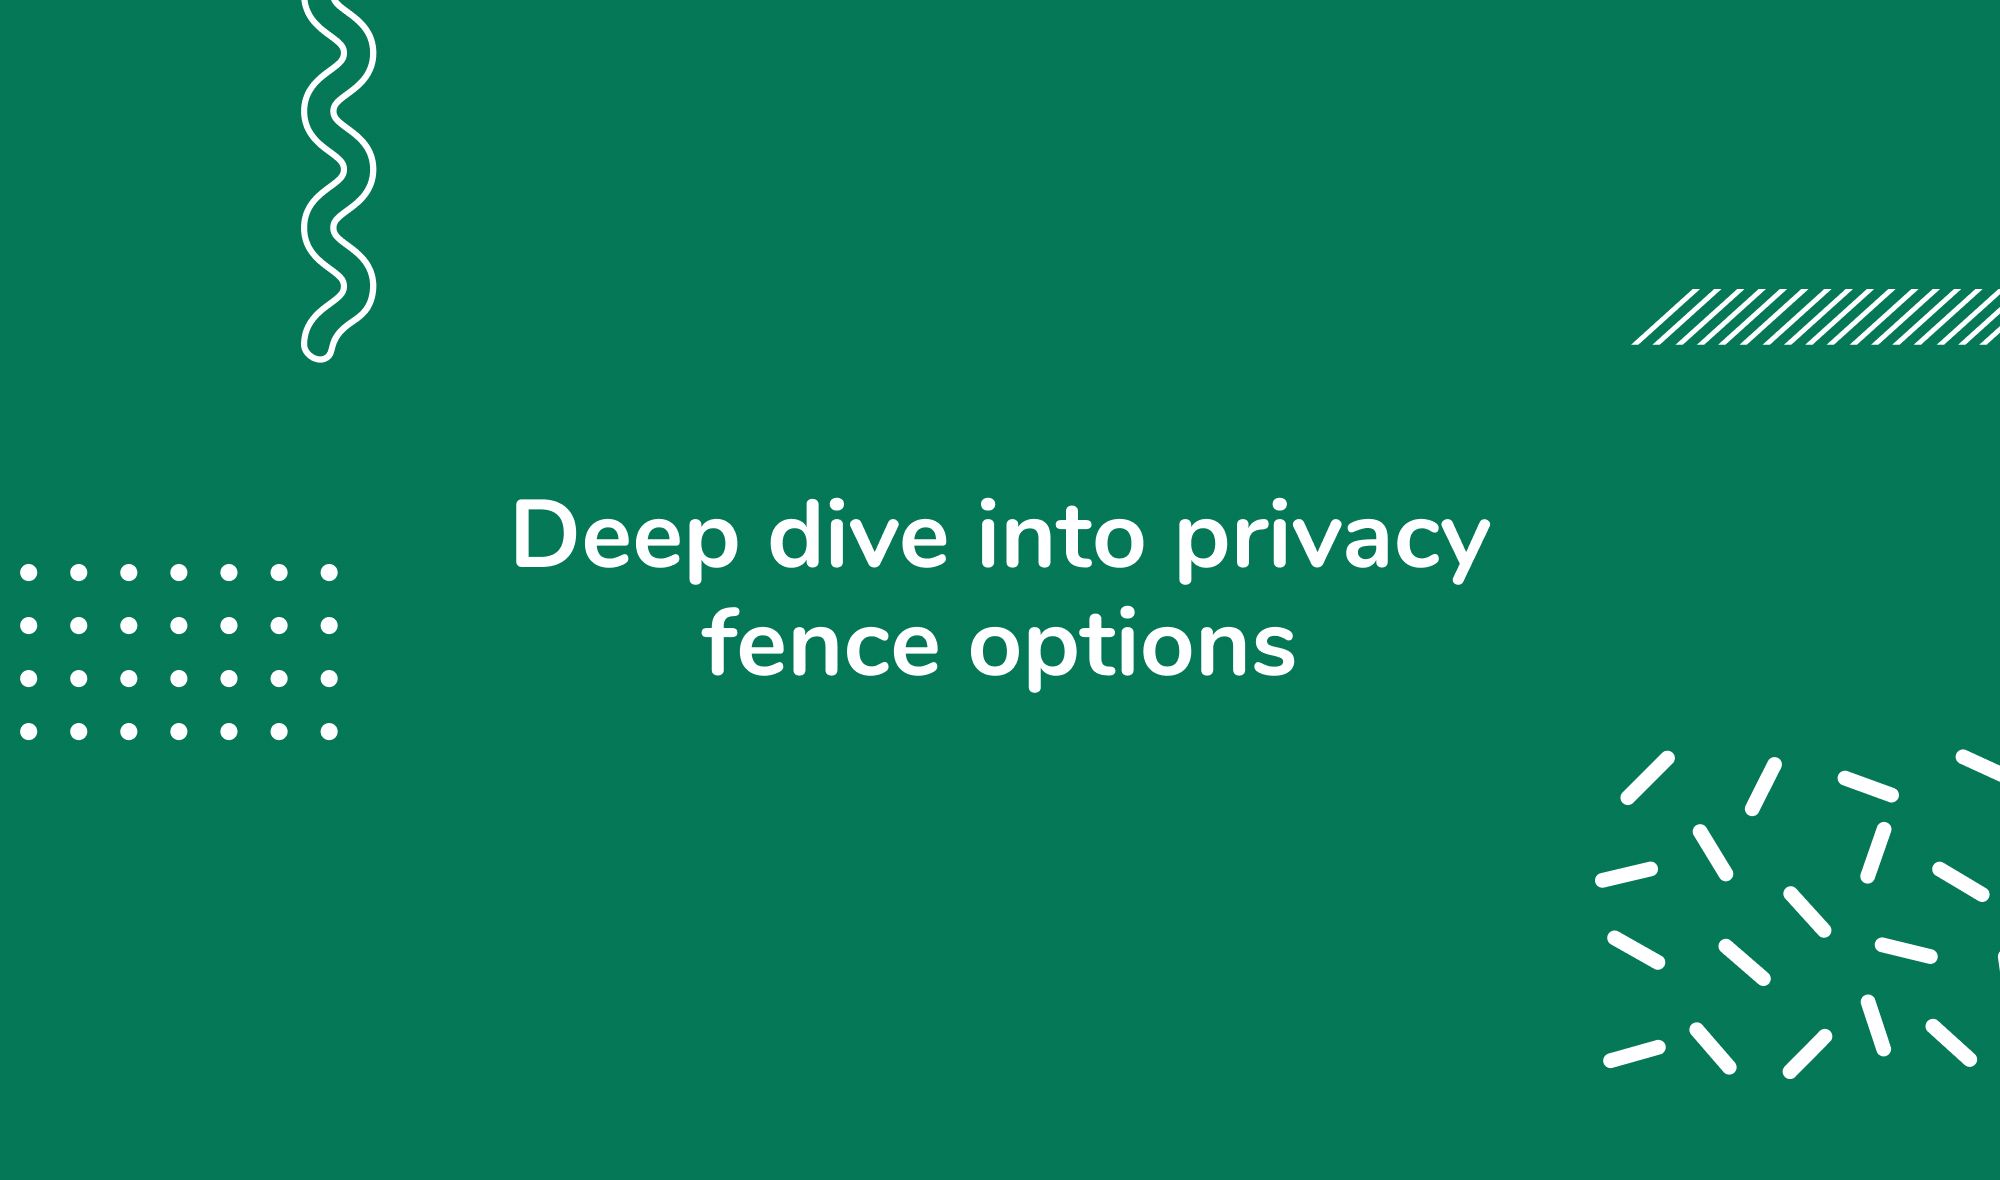 Deep dive into privacy fence options